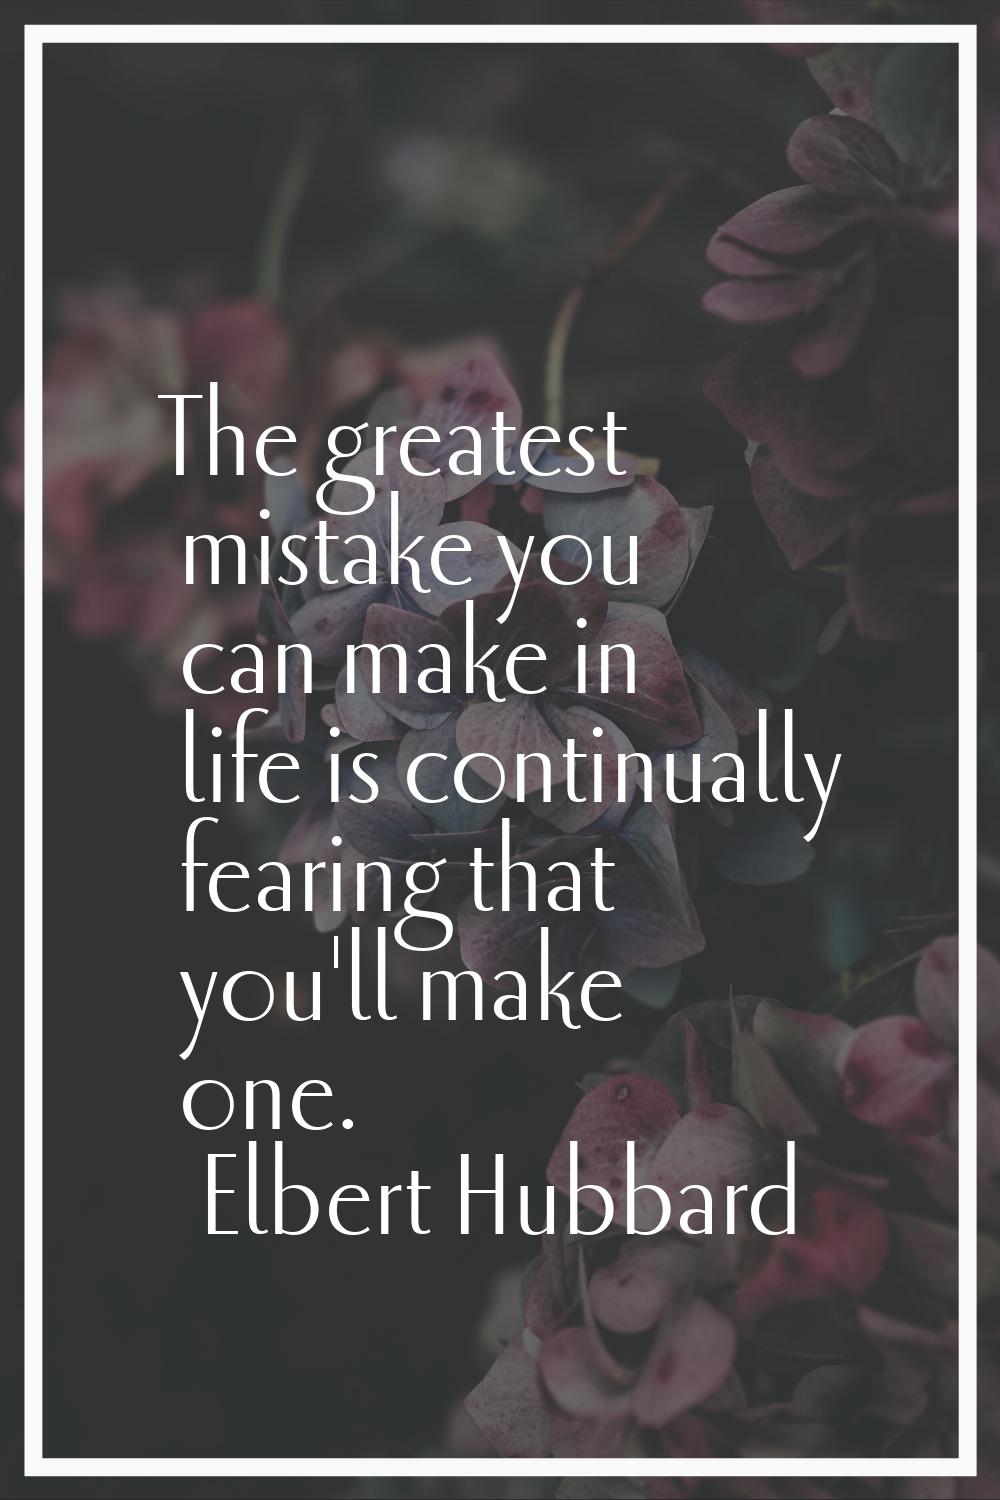 The greatest mistake you can make in life is continually fearing that you'll make one.